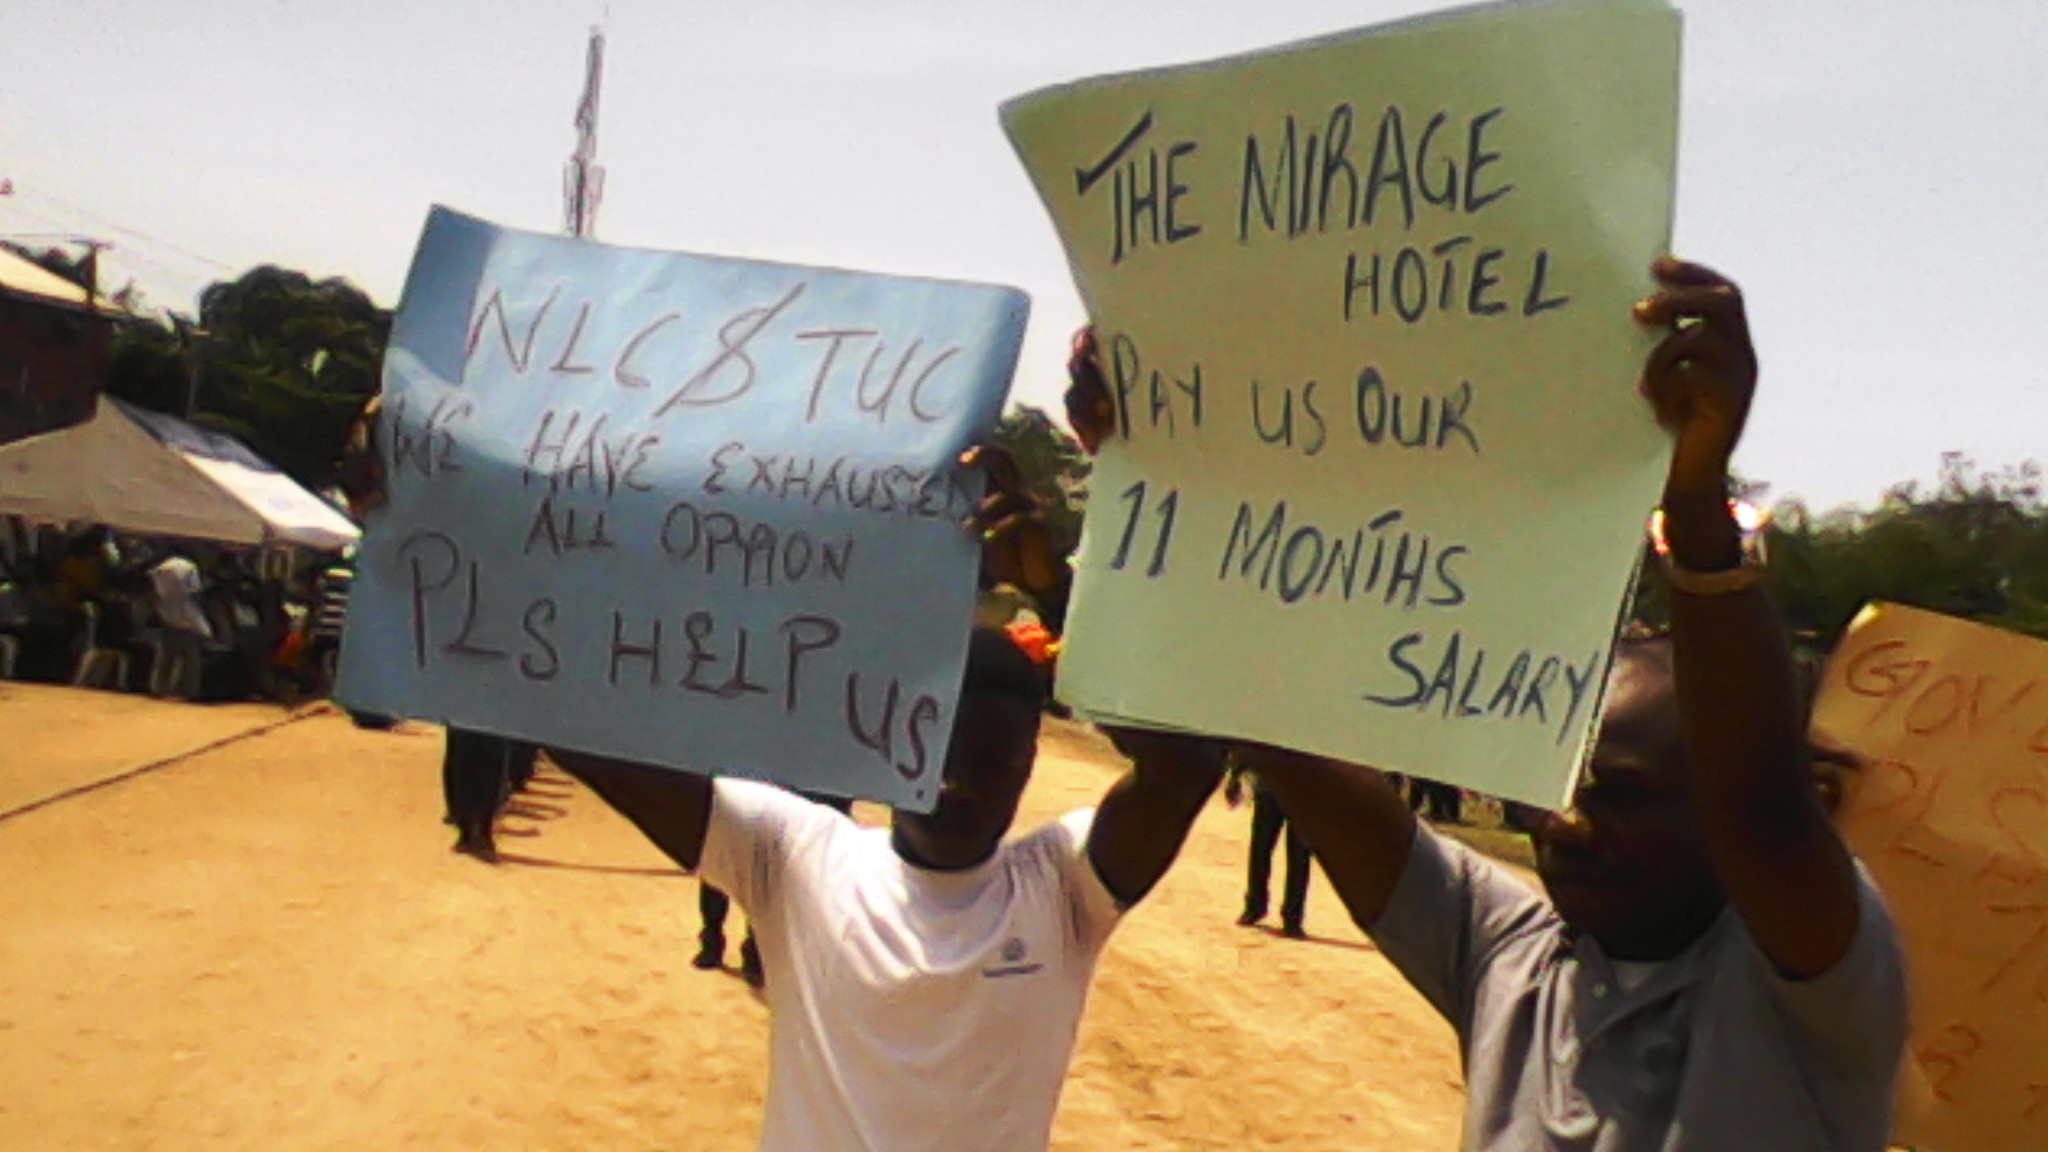 Placard carrying staff of Mirage Hotel